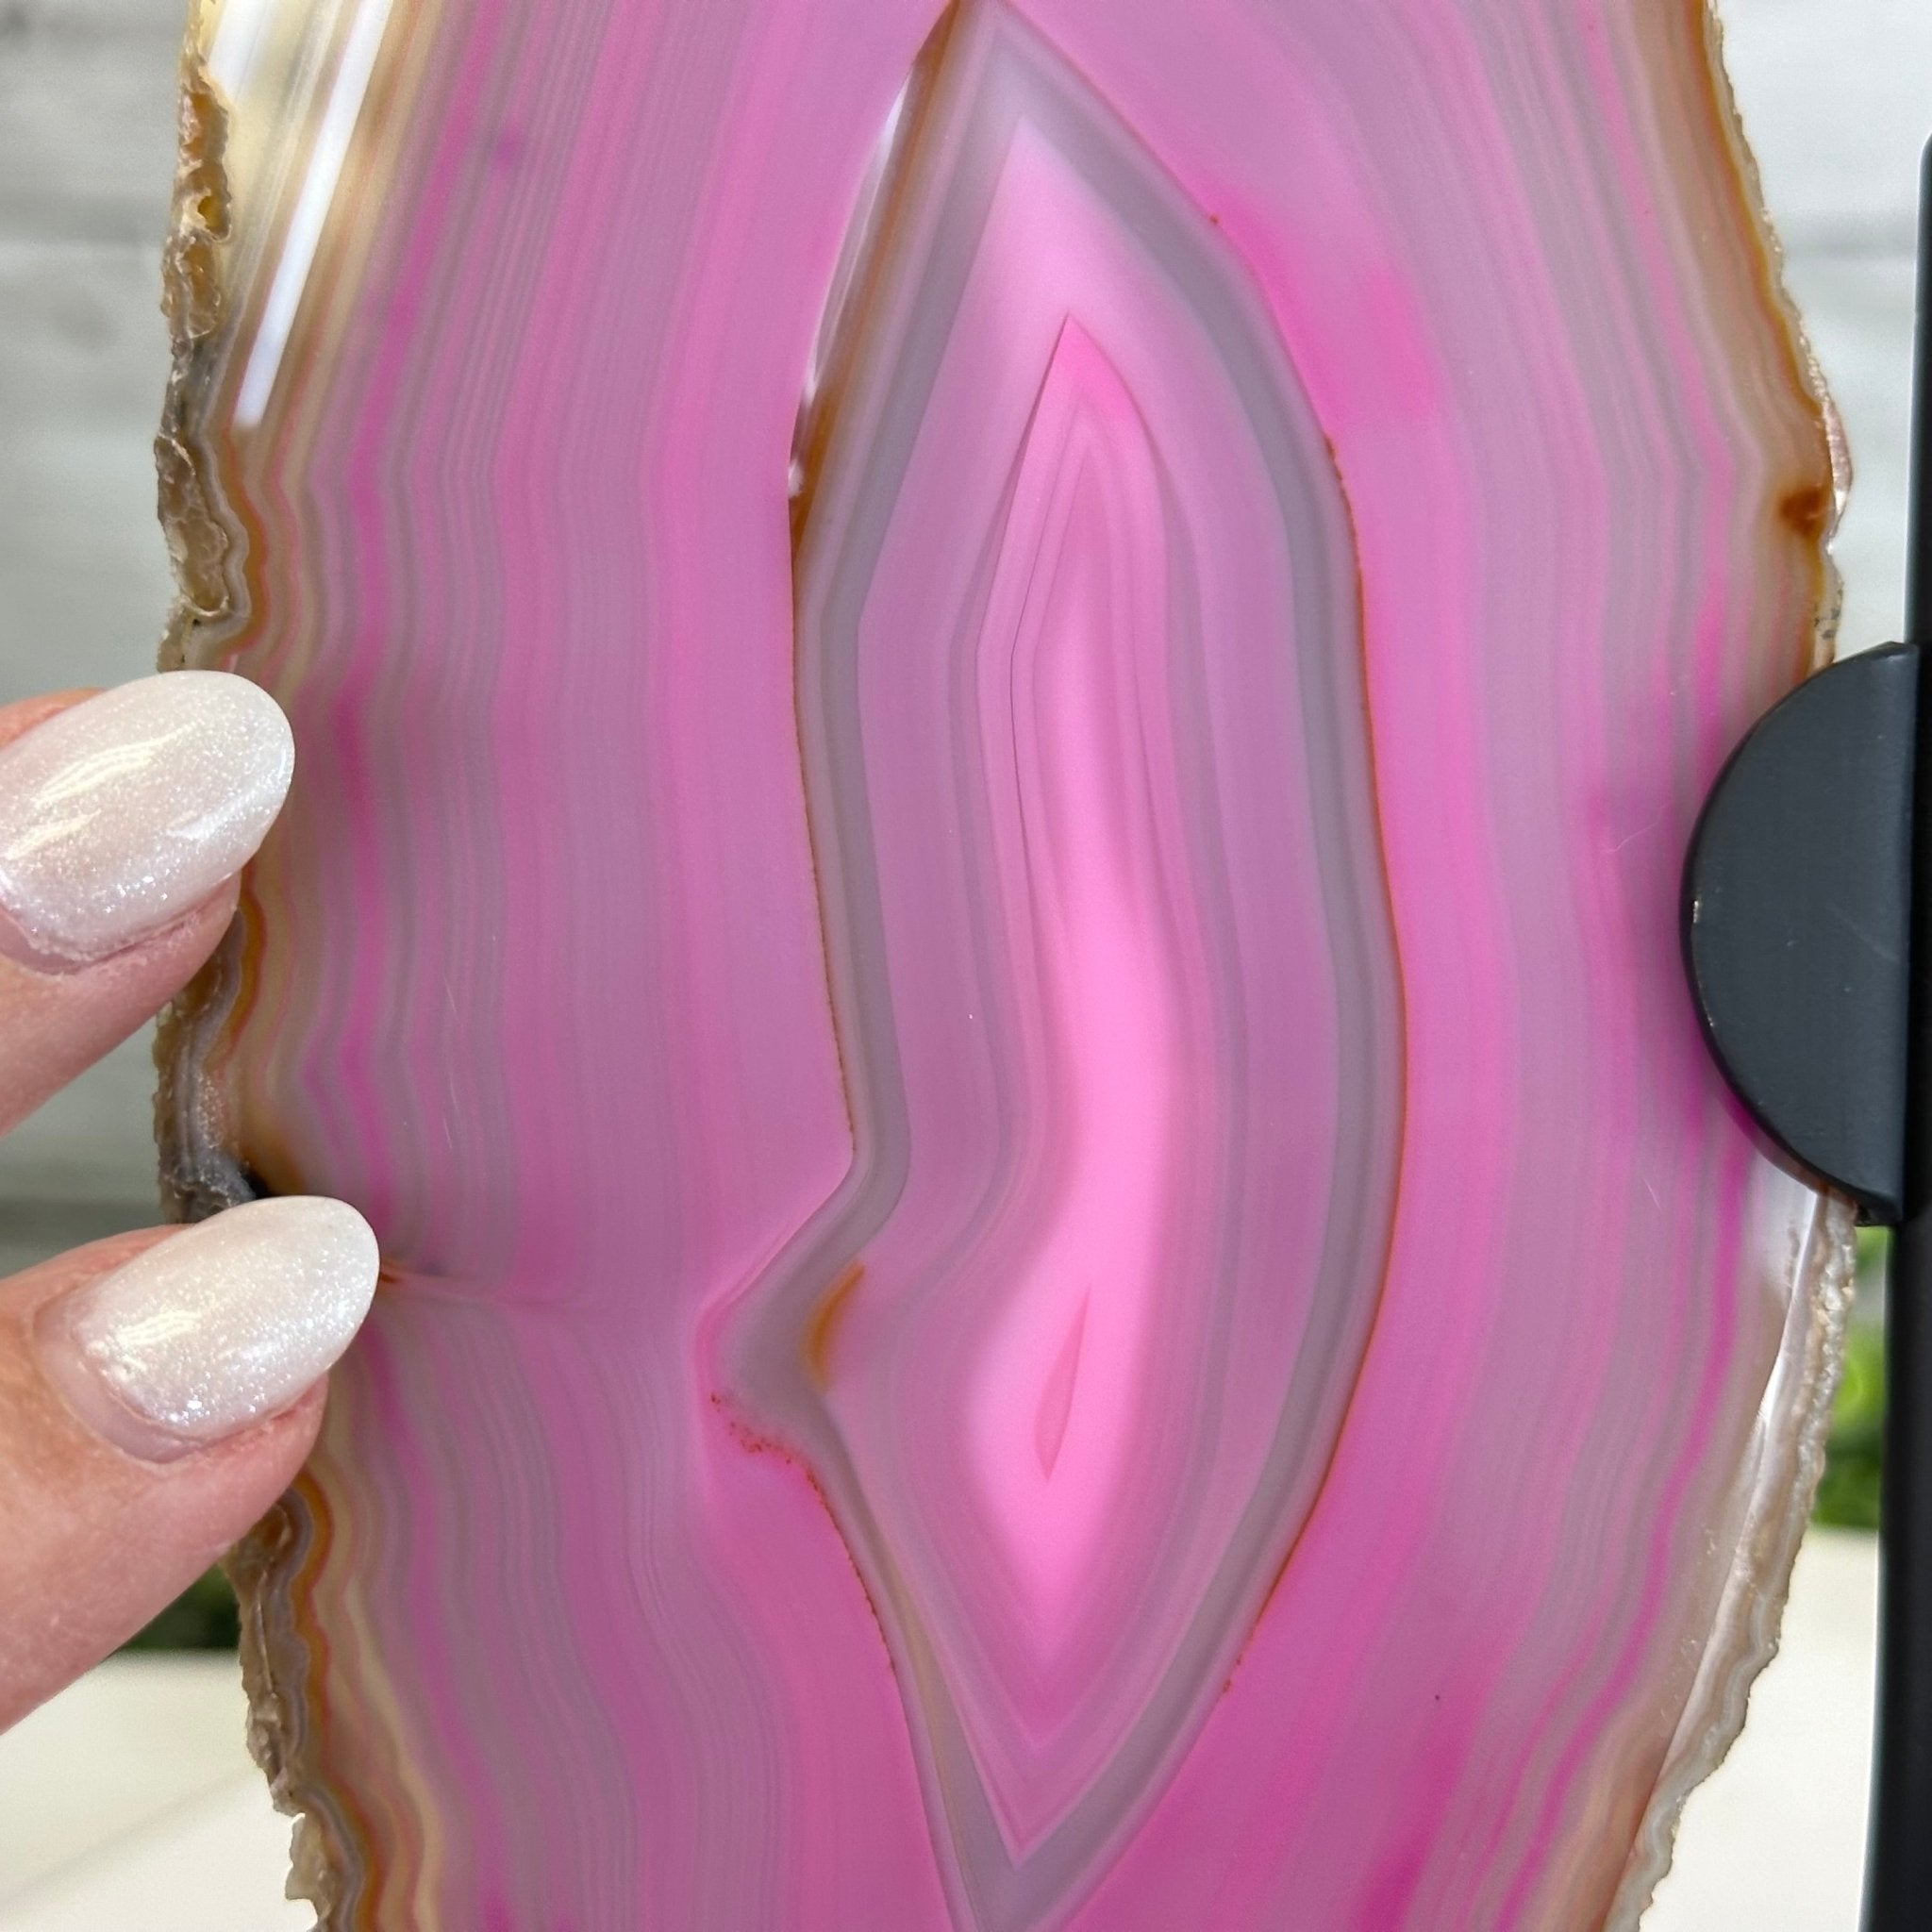 Pink Agate "Butterfly Wings", Dyed Pink, 8.7" Tall #5050PA-044 - Brazil GemsBrazil GemsPink Agate "Butterfly Wings", Dyed Pink, 8.7" Tall #5050PA-044Agate Butterfly Wings5050PA-044